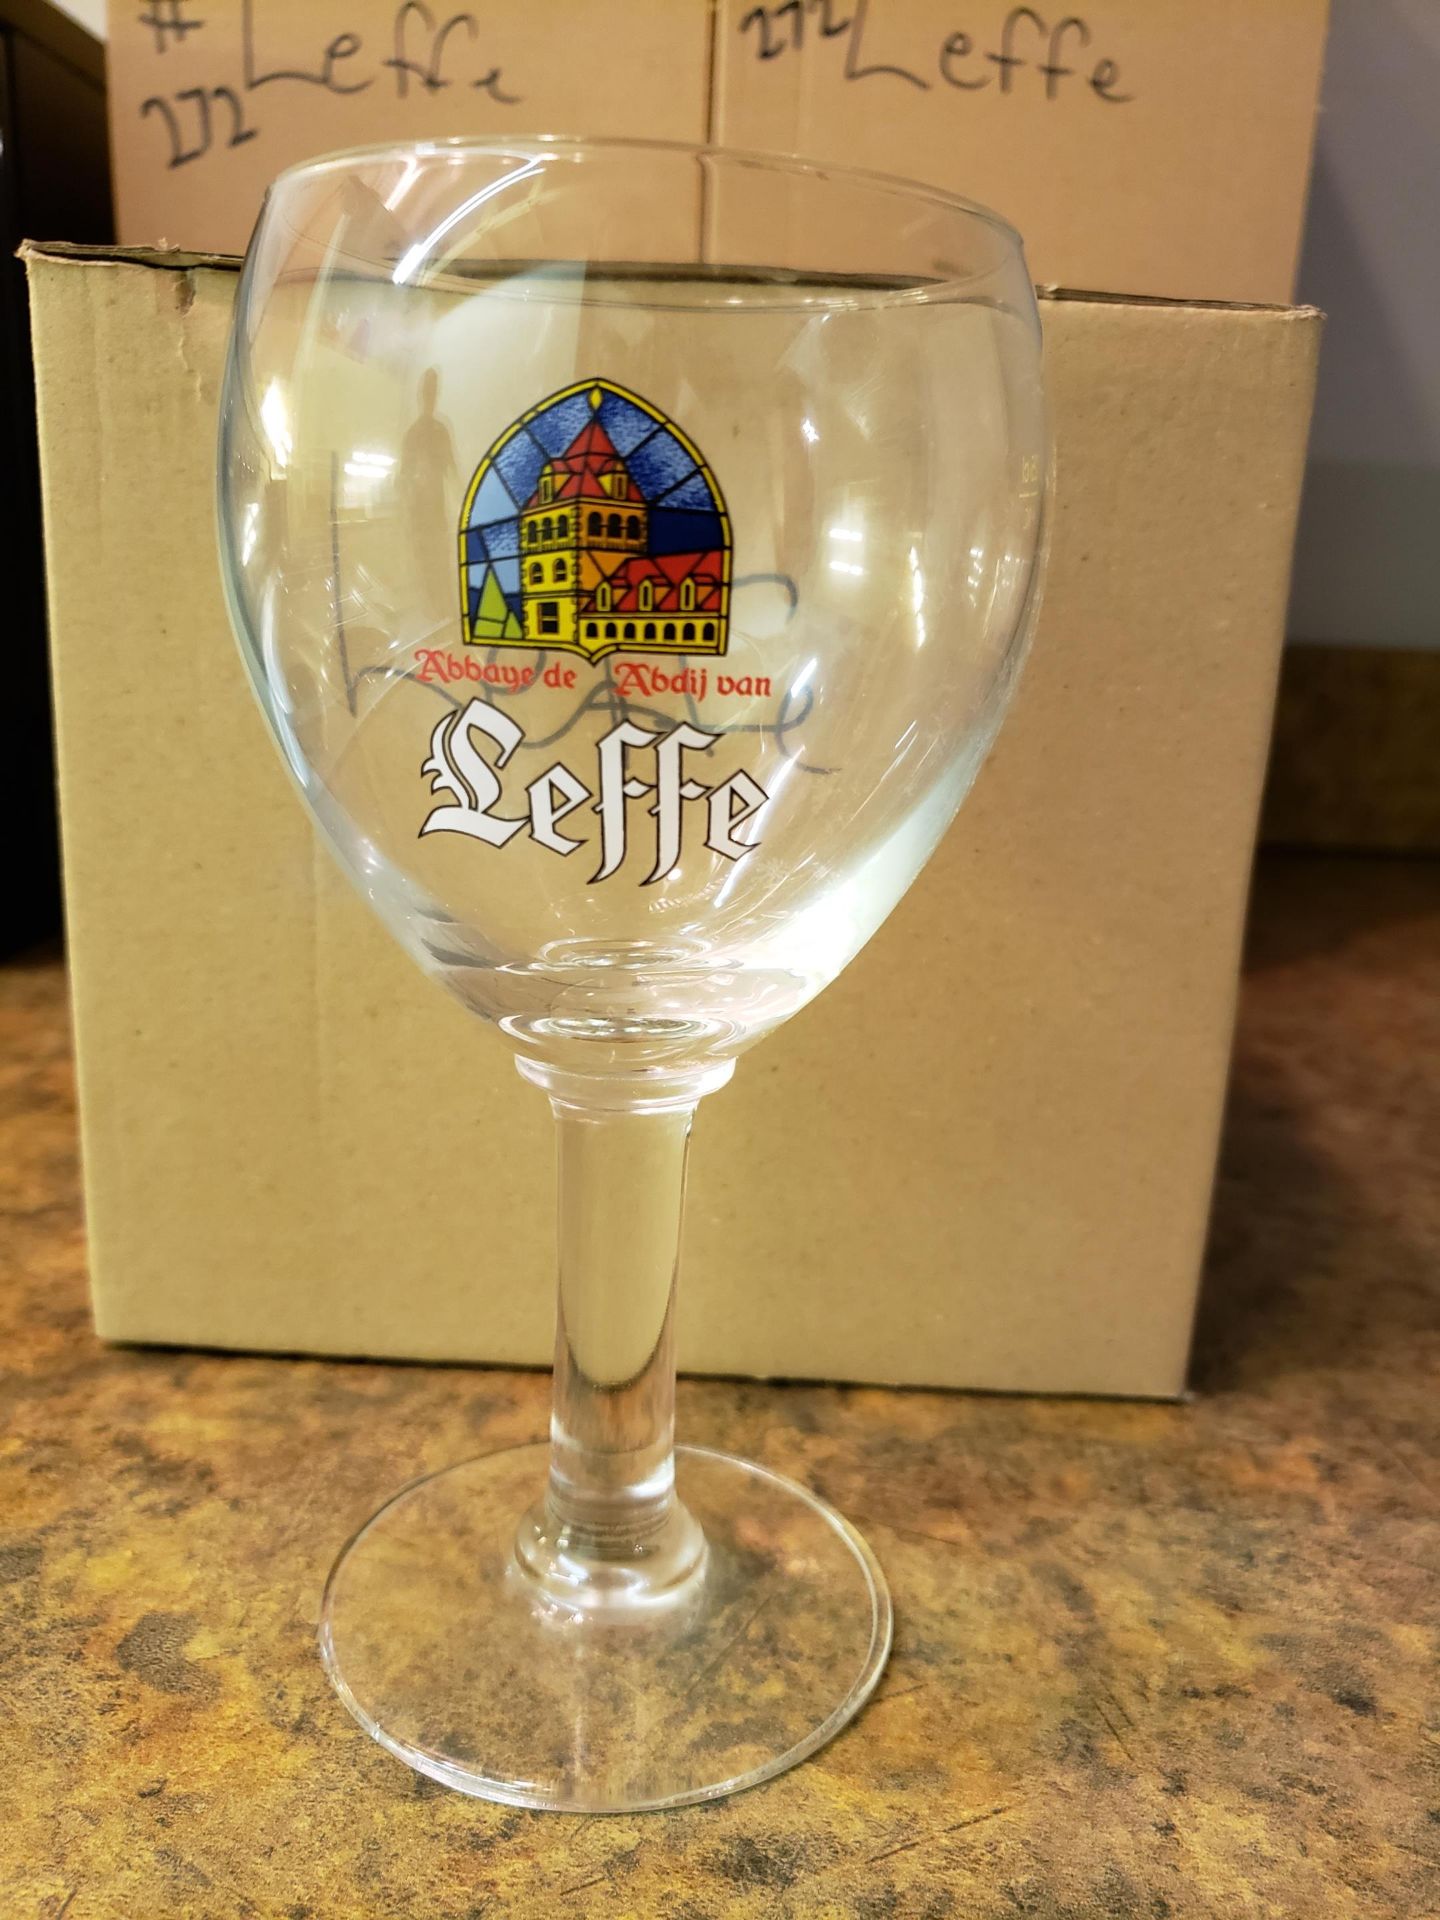 Lot of (39) Leffe Beer Glasses - Image 2 of 9